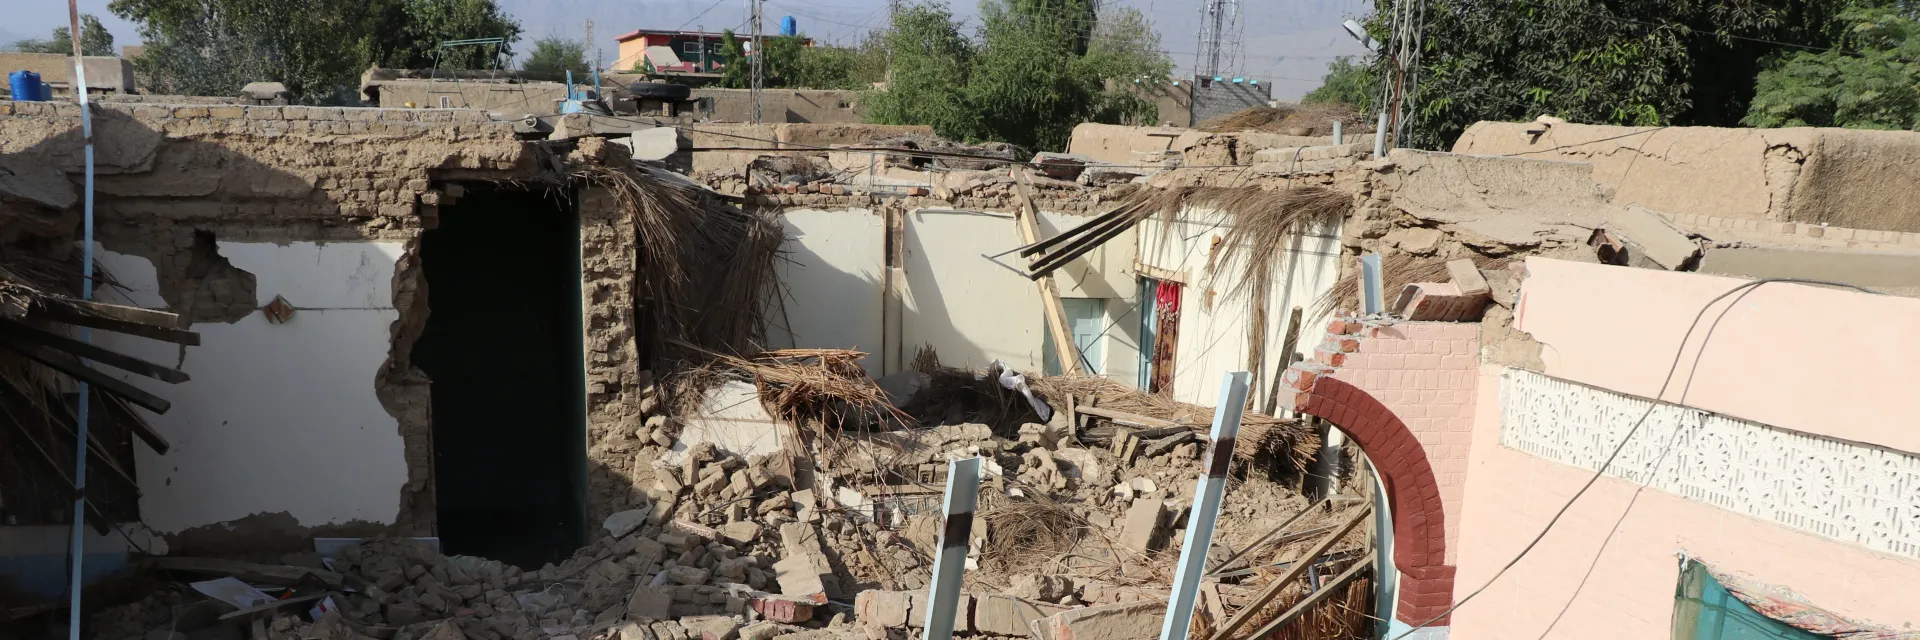 Many houses were destroyed by the earthquake in Pakistan